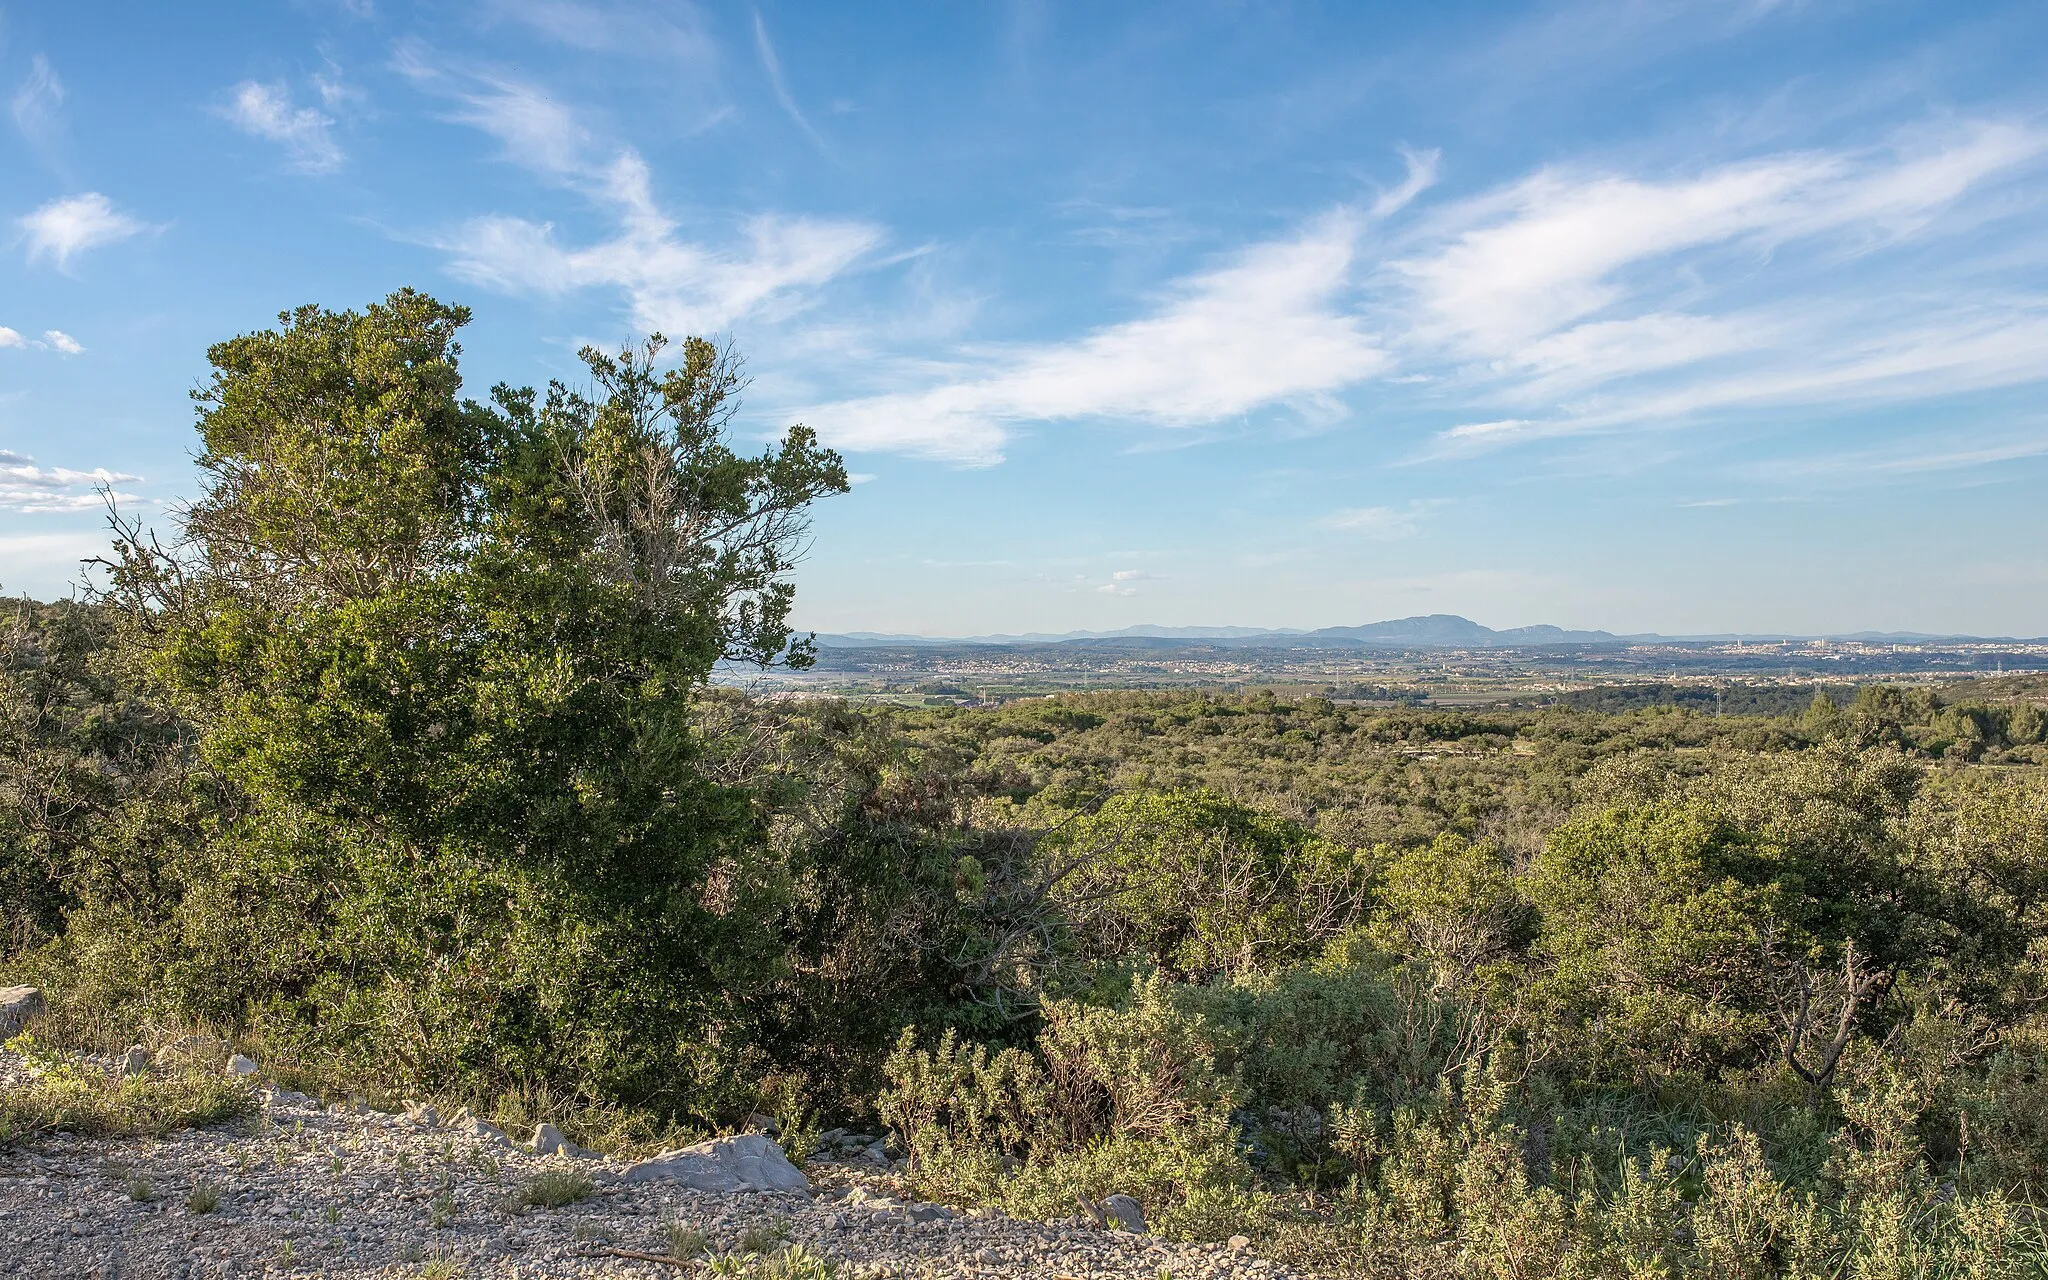 Photo showing: The plain of Fabrègues is a 20 km corridor which connects Montpellier in the Northeast to the Étang de Thau in the Southwest. View from the South in the La Gardiole Mountain in Fabrègues, Hérault, France.